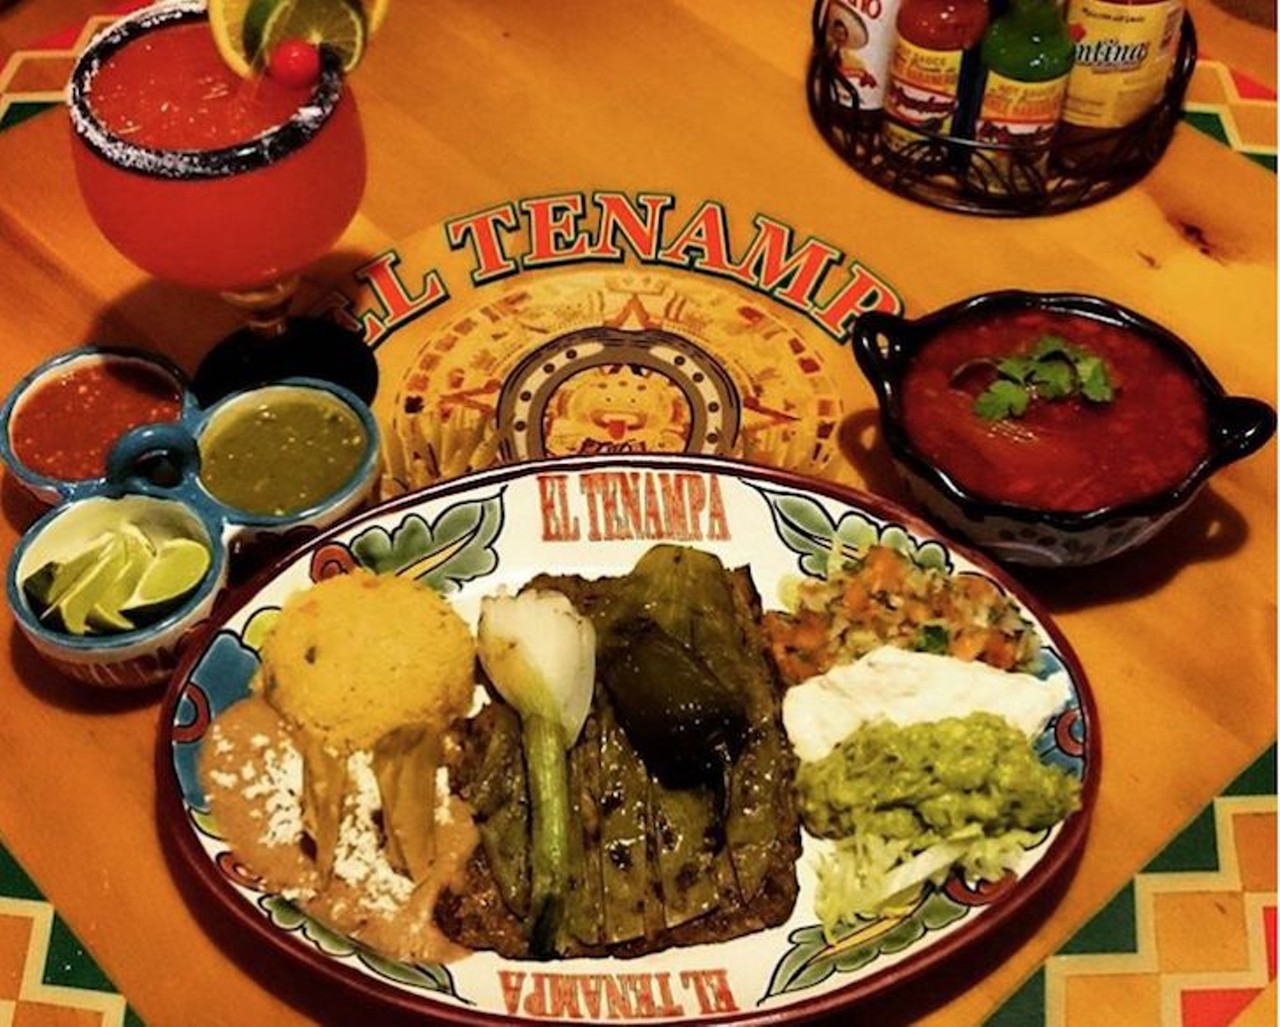 El Tenampa Mexican Restaurant 
4565 W. Irlo Bronson Memorial Highway, Kissimmee, 407-397-1981
It&#146;s a little bit of a drive, but El Tenampa is worth it. The Kissimmee joint boasts an extensive menu with filling offerings, including vegetarian fare. Stop in on the weekend and you can even enjoy a live performance from a mariachi band. 
Photo via marcos2184/Instagram